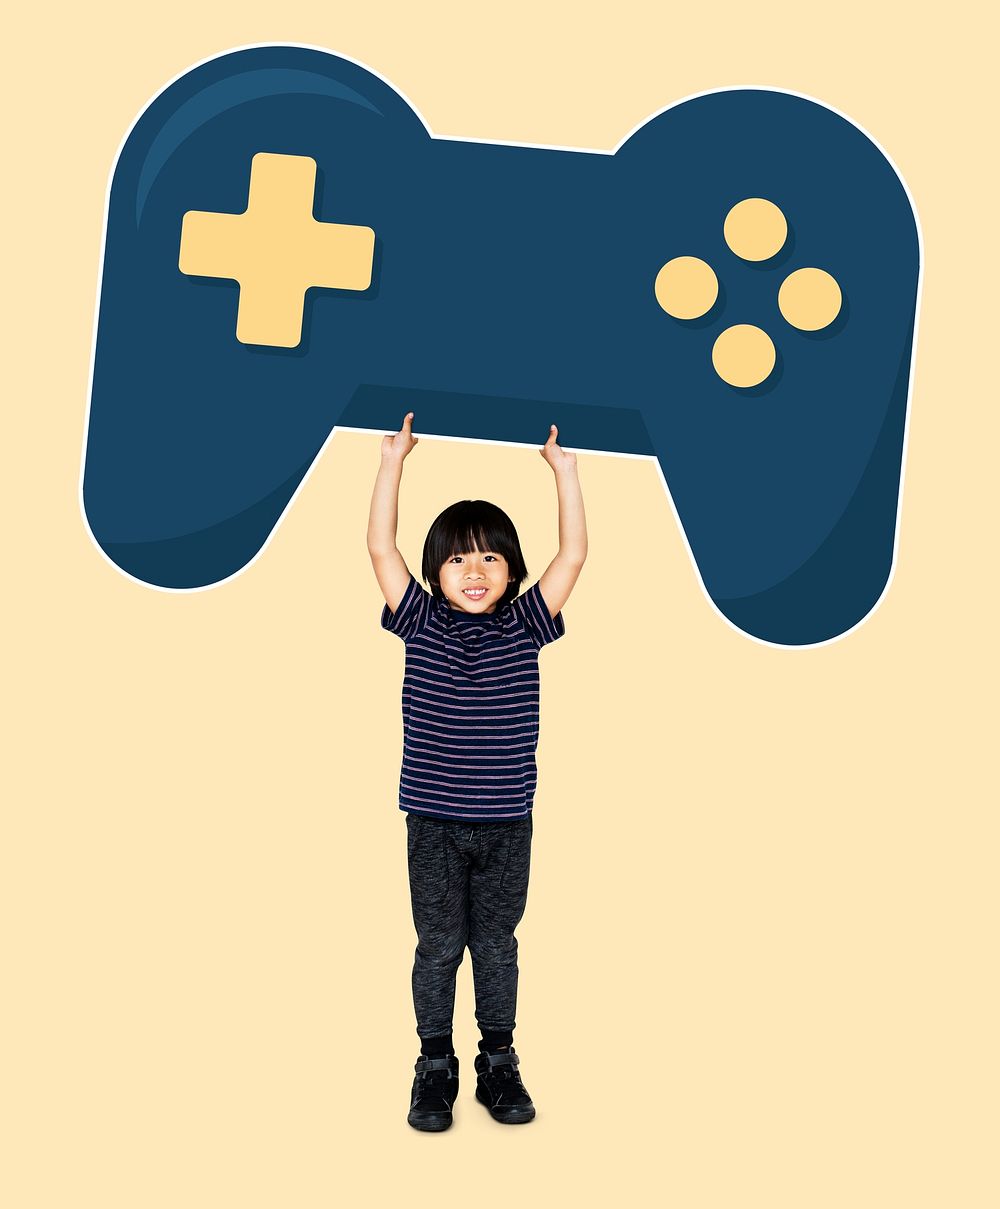 Little boy holding a game controller